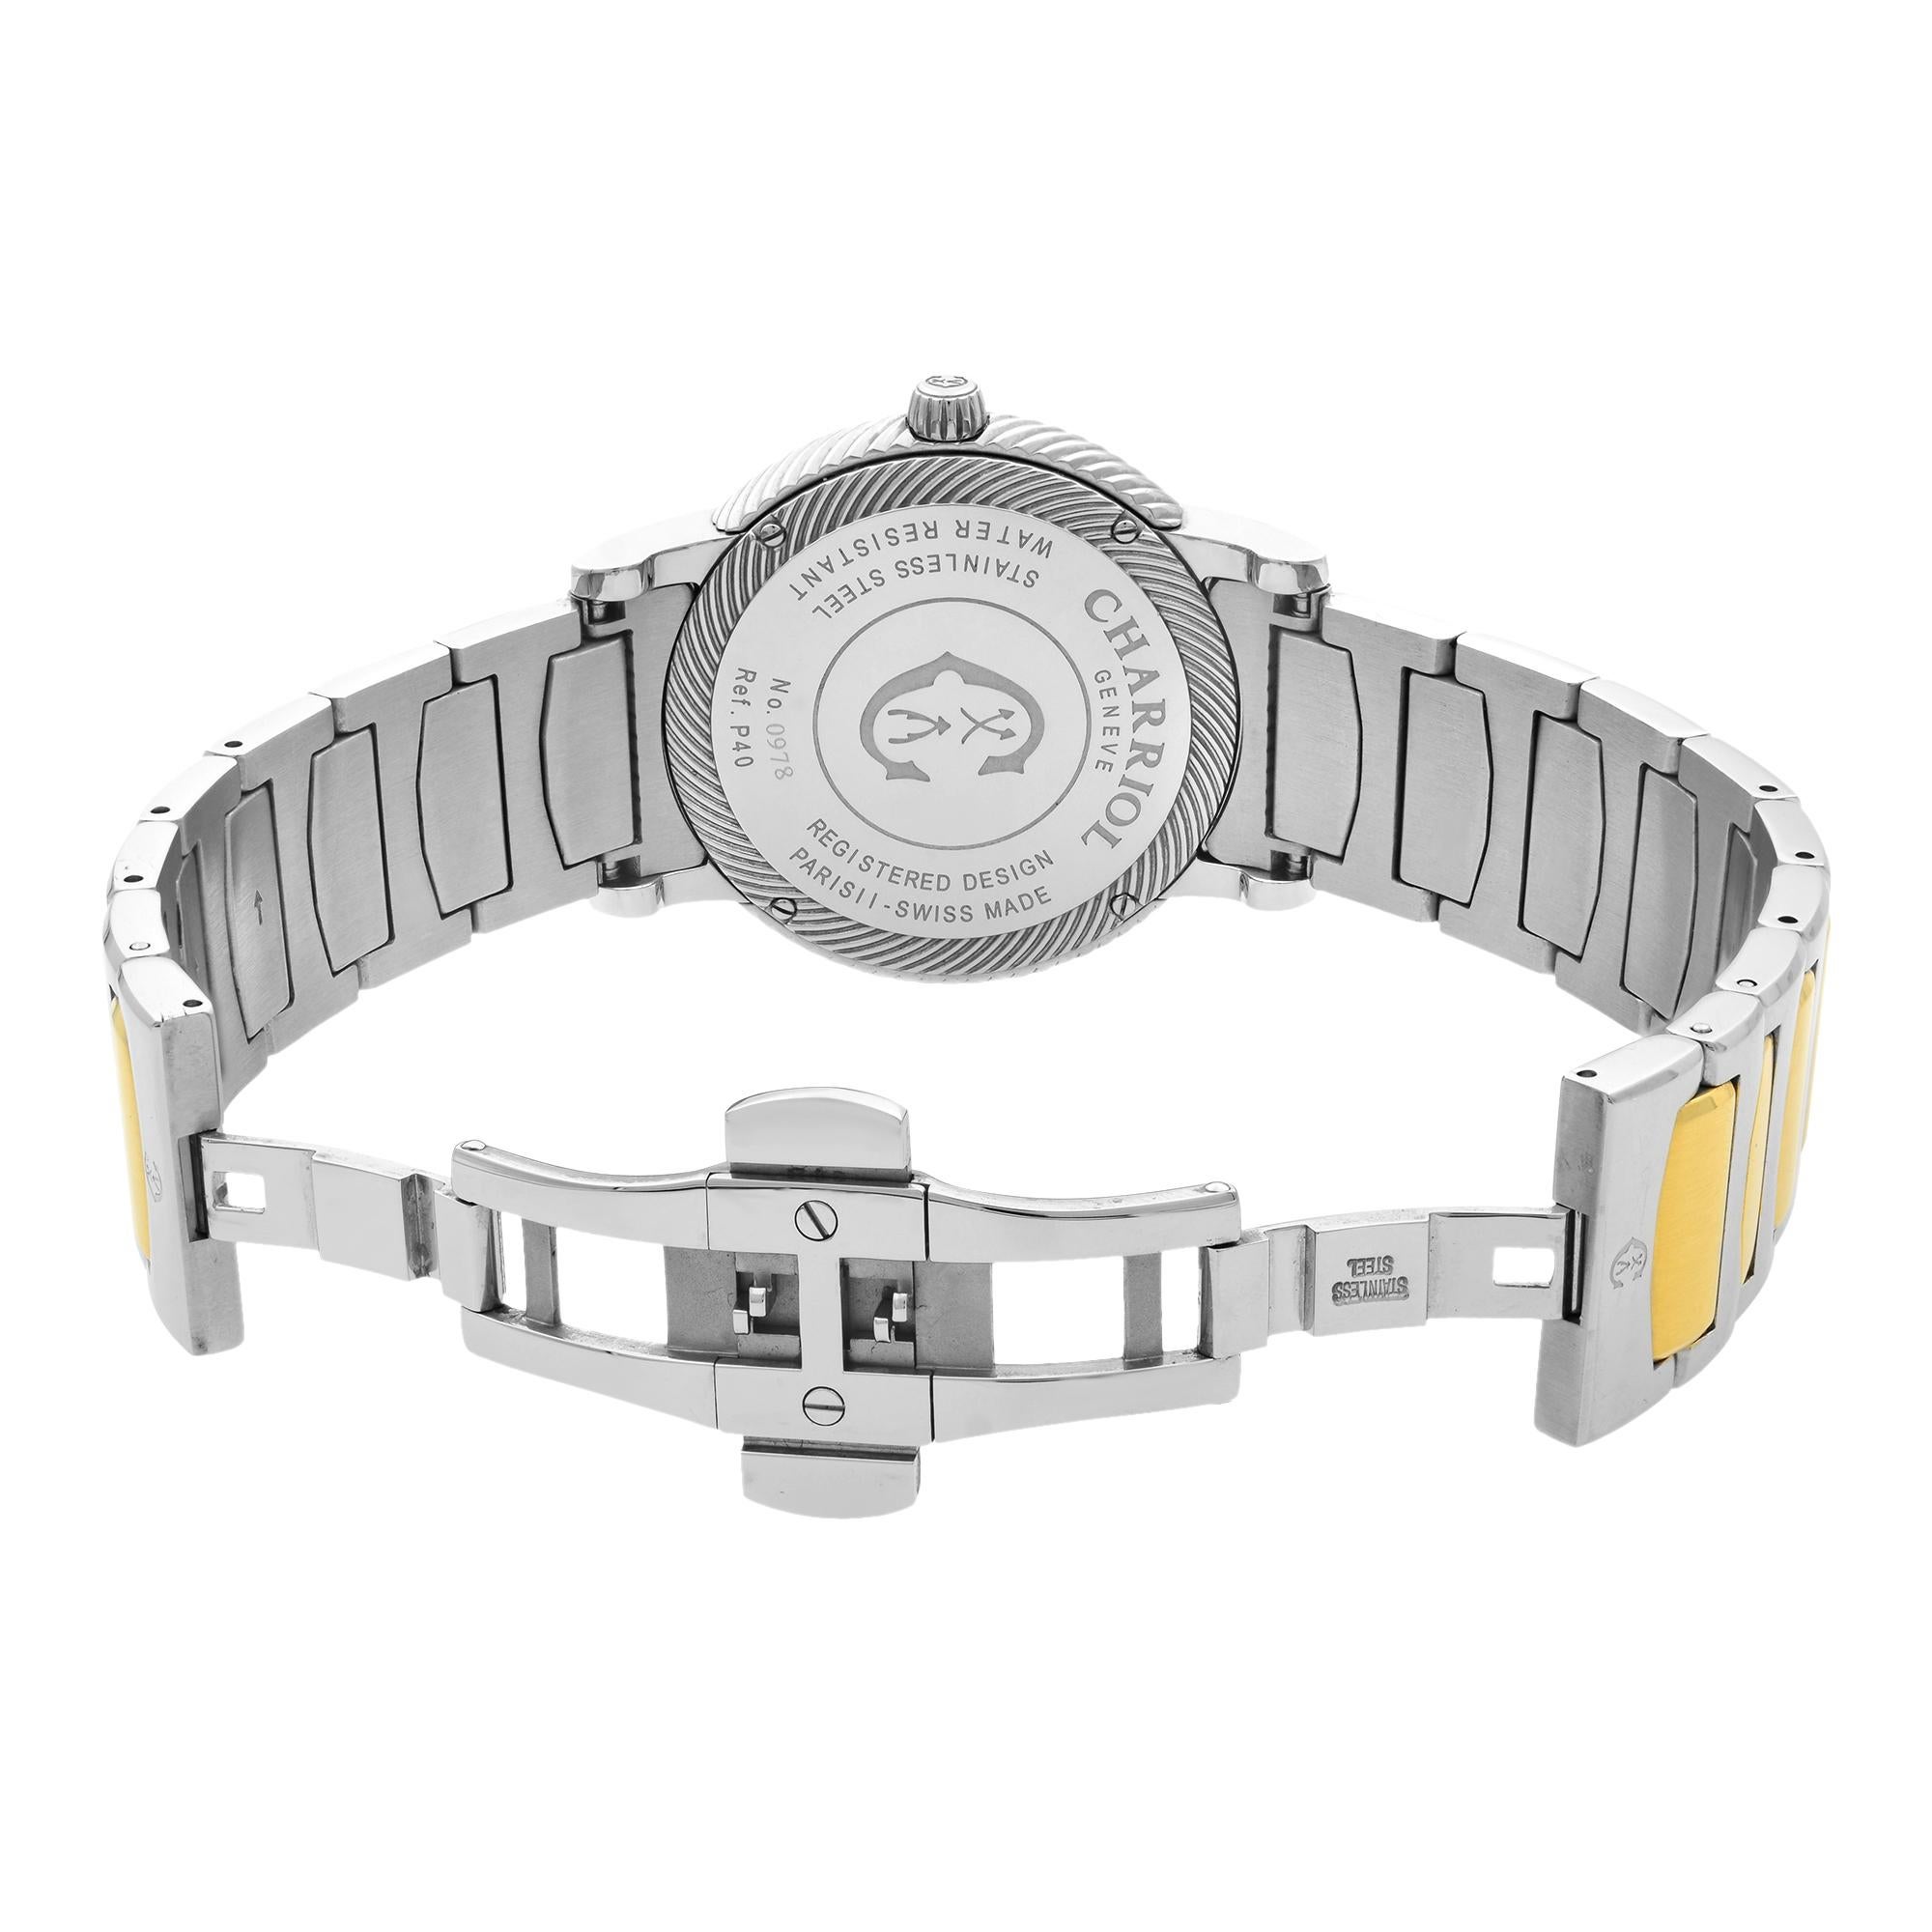 Charriol Parisii Two-Tone Steel Silver Dial Quartz Unisex Watch P40SY2.931.001 In Excellent Condition For Sale In New York, NY